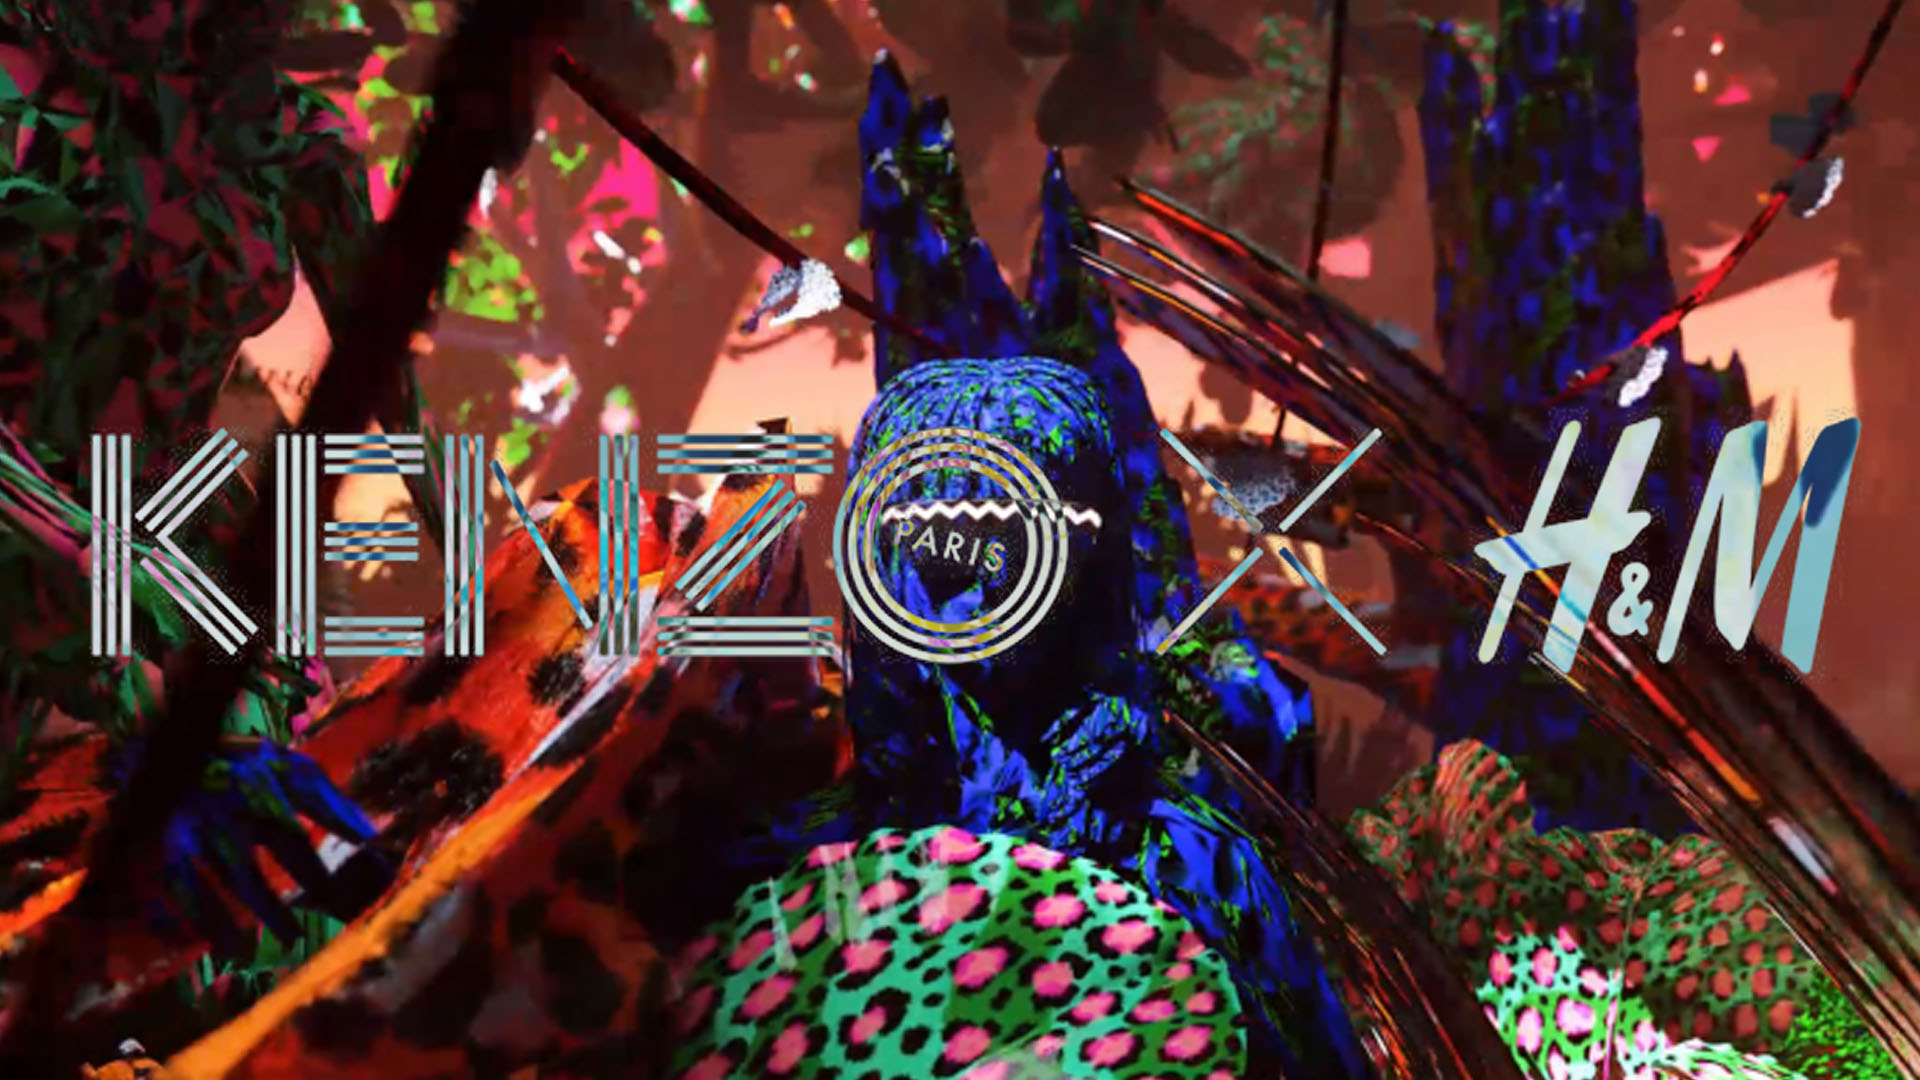 MY exclusive  INTERVIEW WITH DESIGNERS OF KENZO